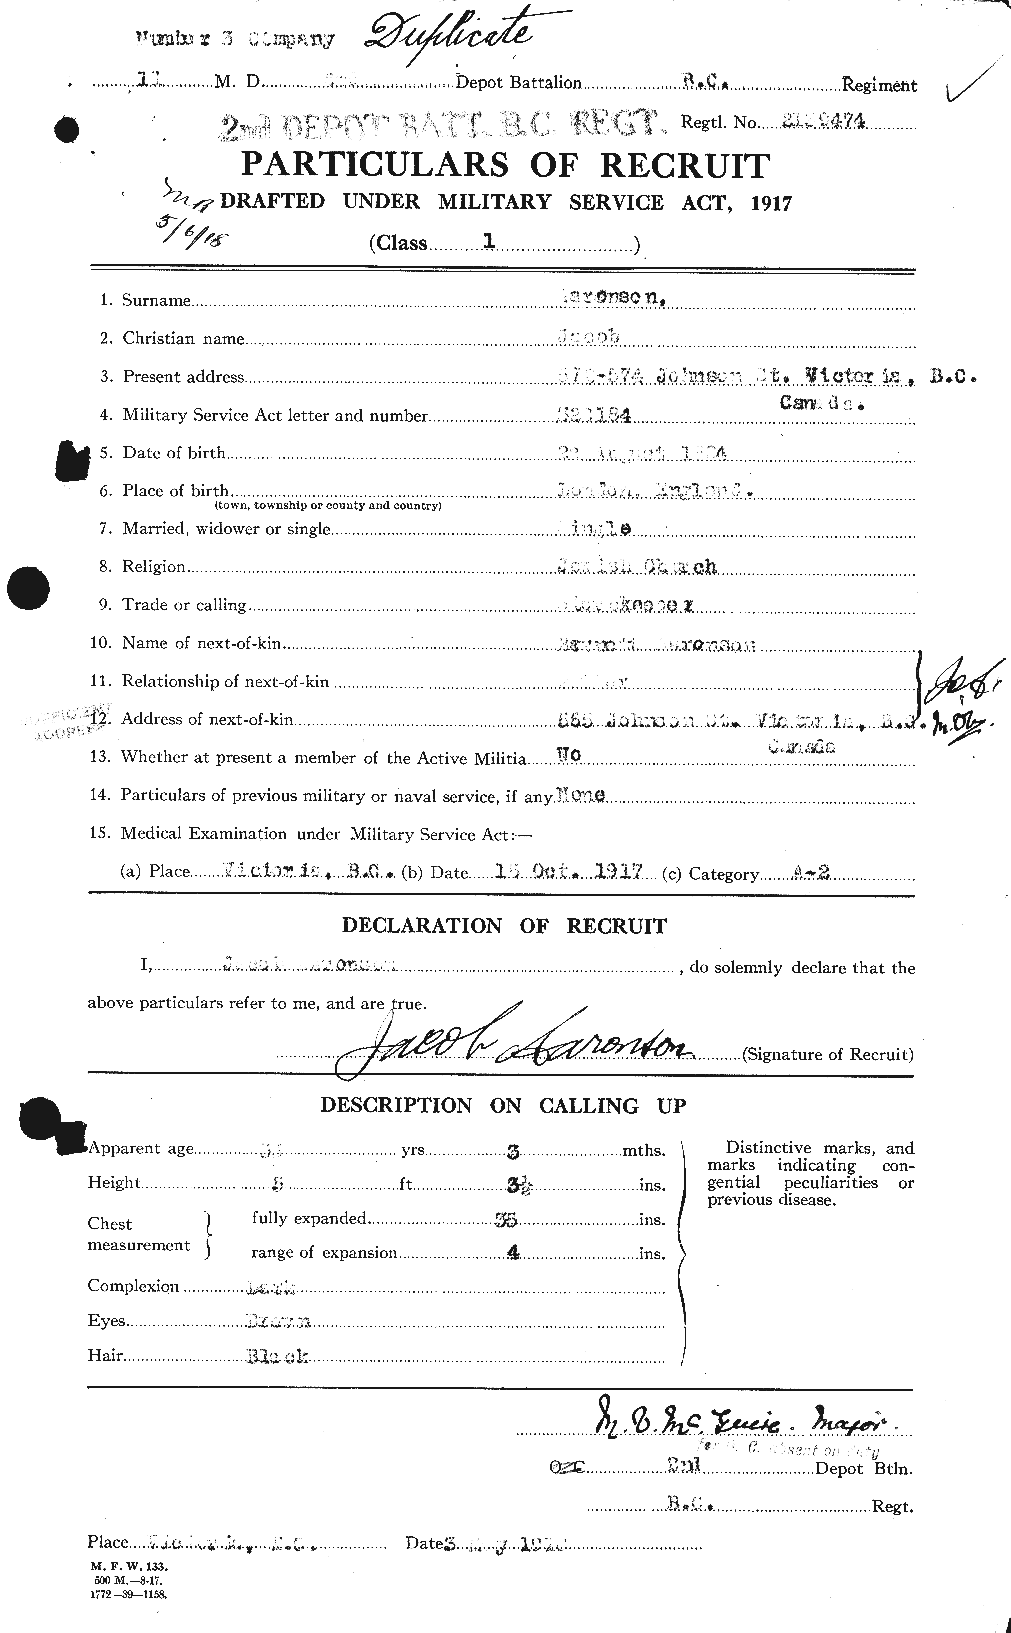 Personnel Records of the First World War - CEF 200748a